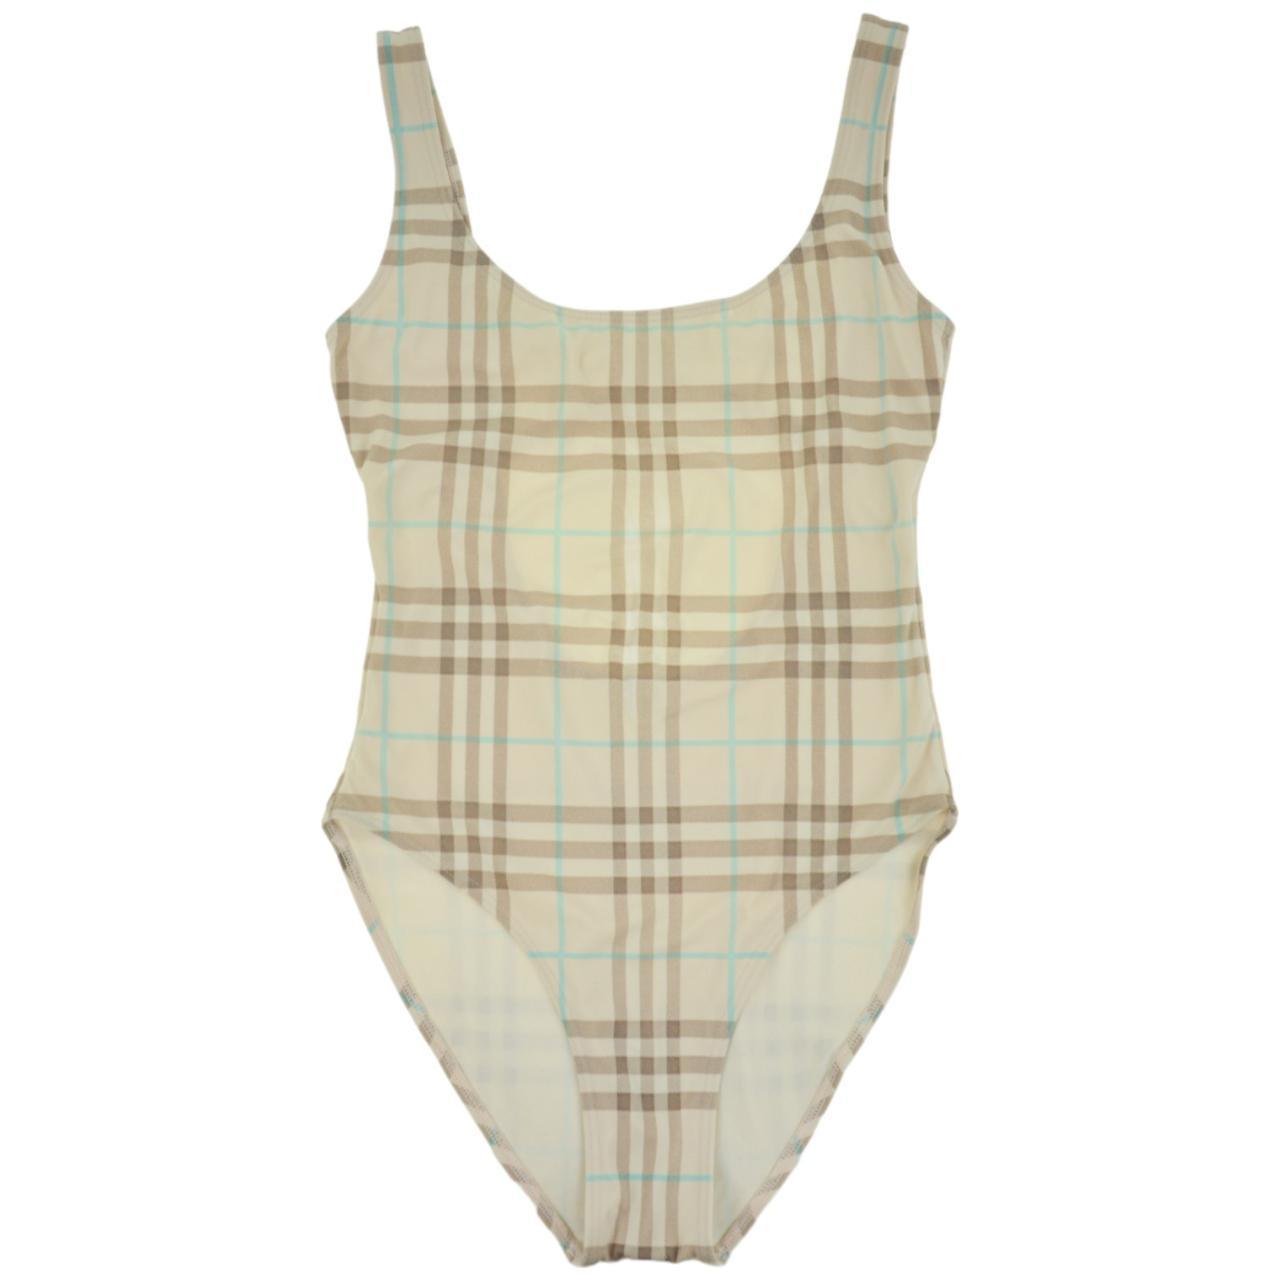 Vintage Burberry Swimming Costume Size M - Known Source